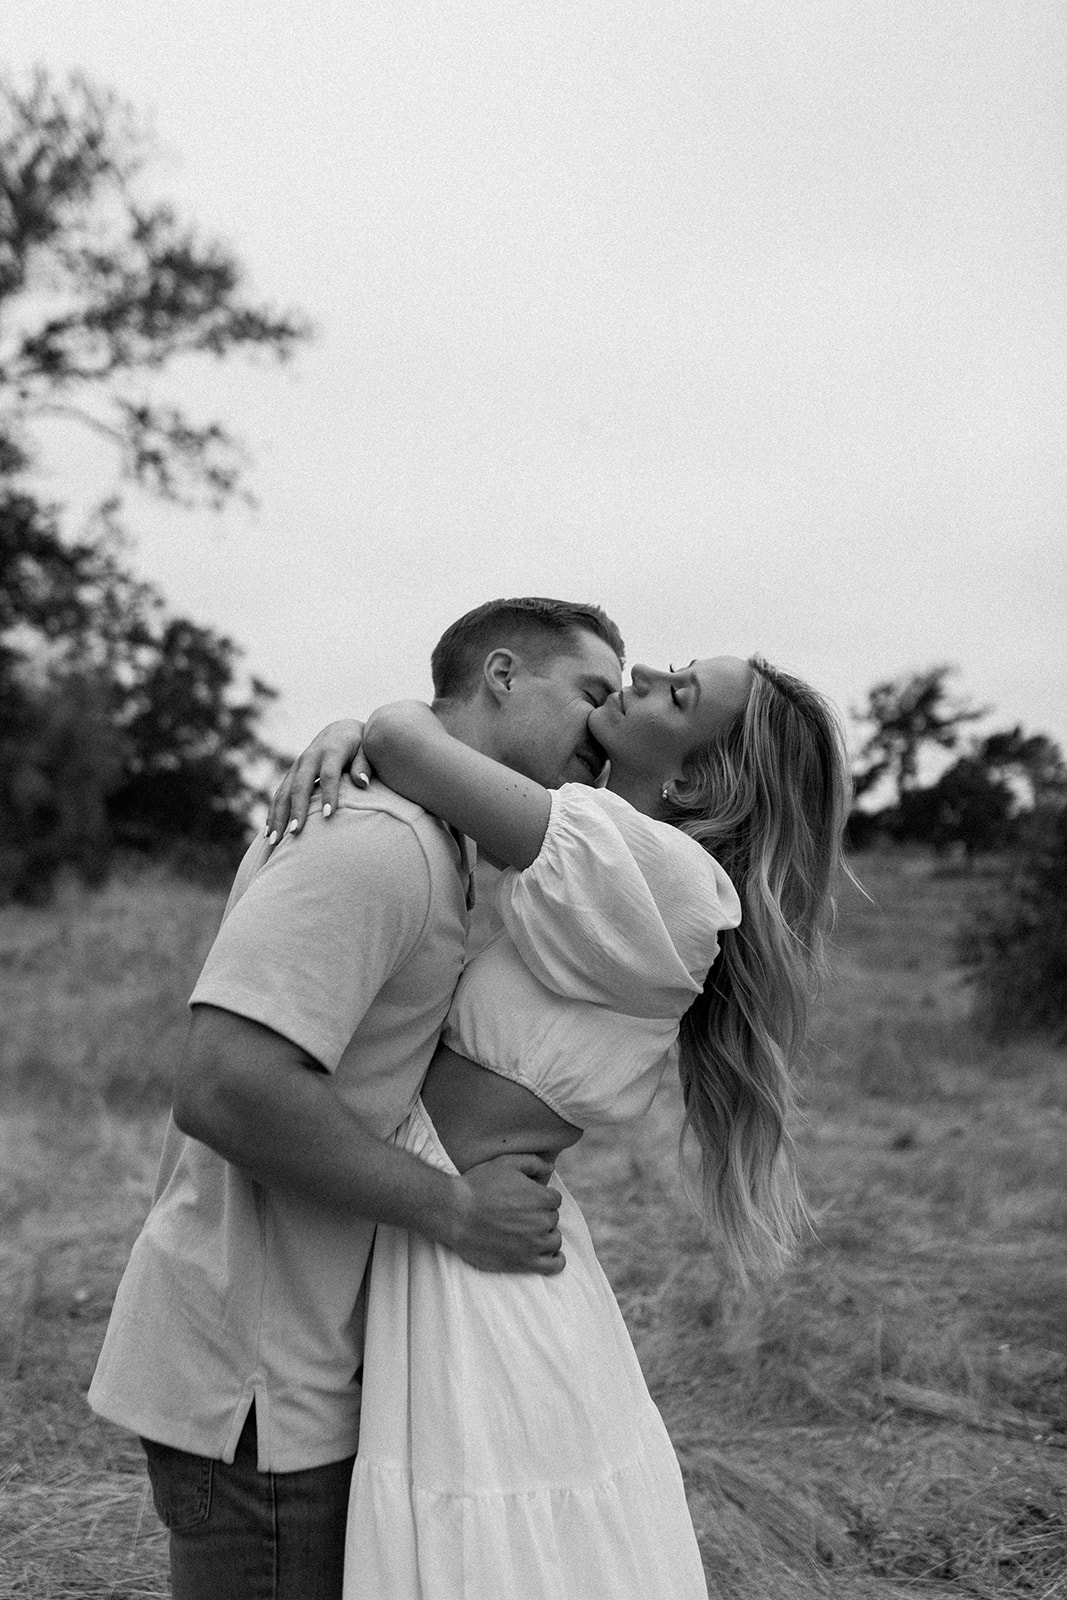 engagement photos in monterey, california, girl with blonde hair and white dress, boy with blonde hair and collared shirt kissing